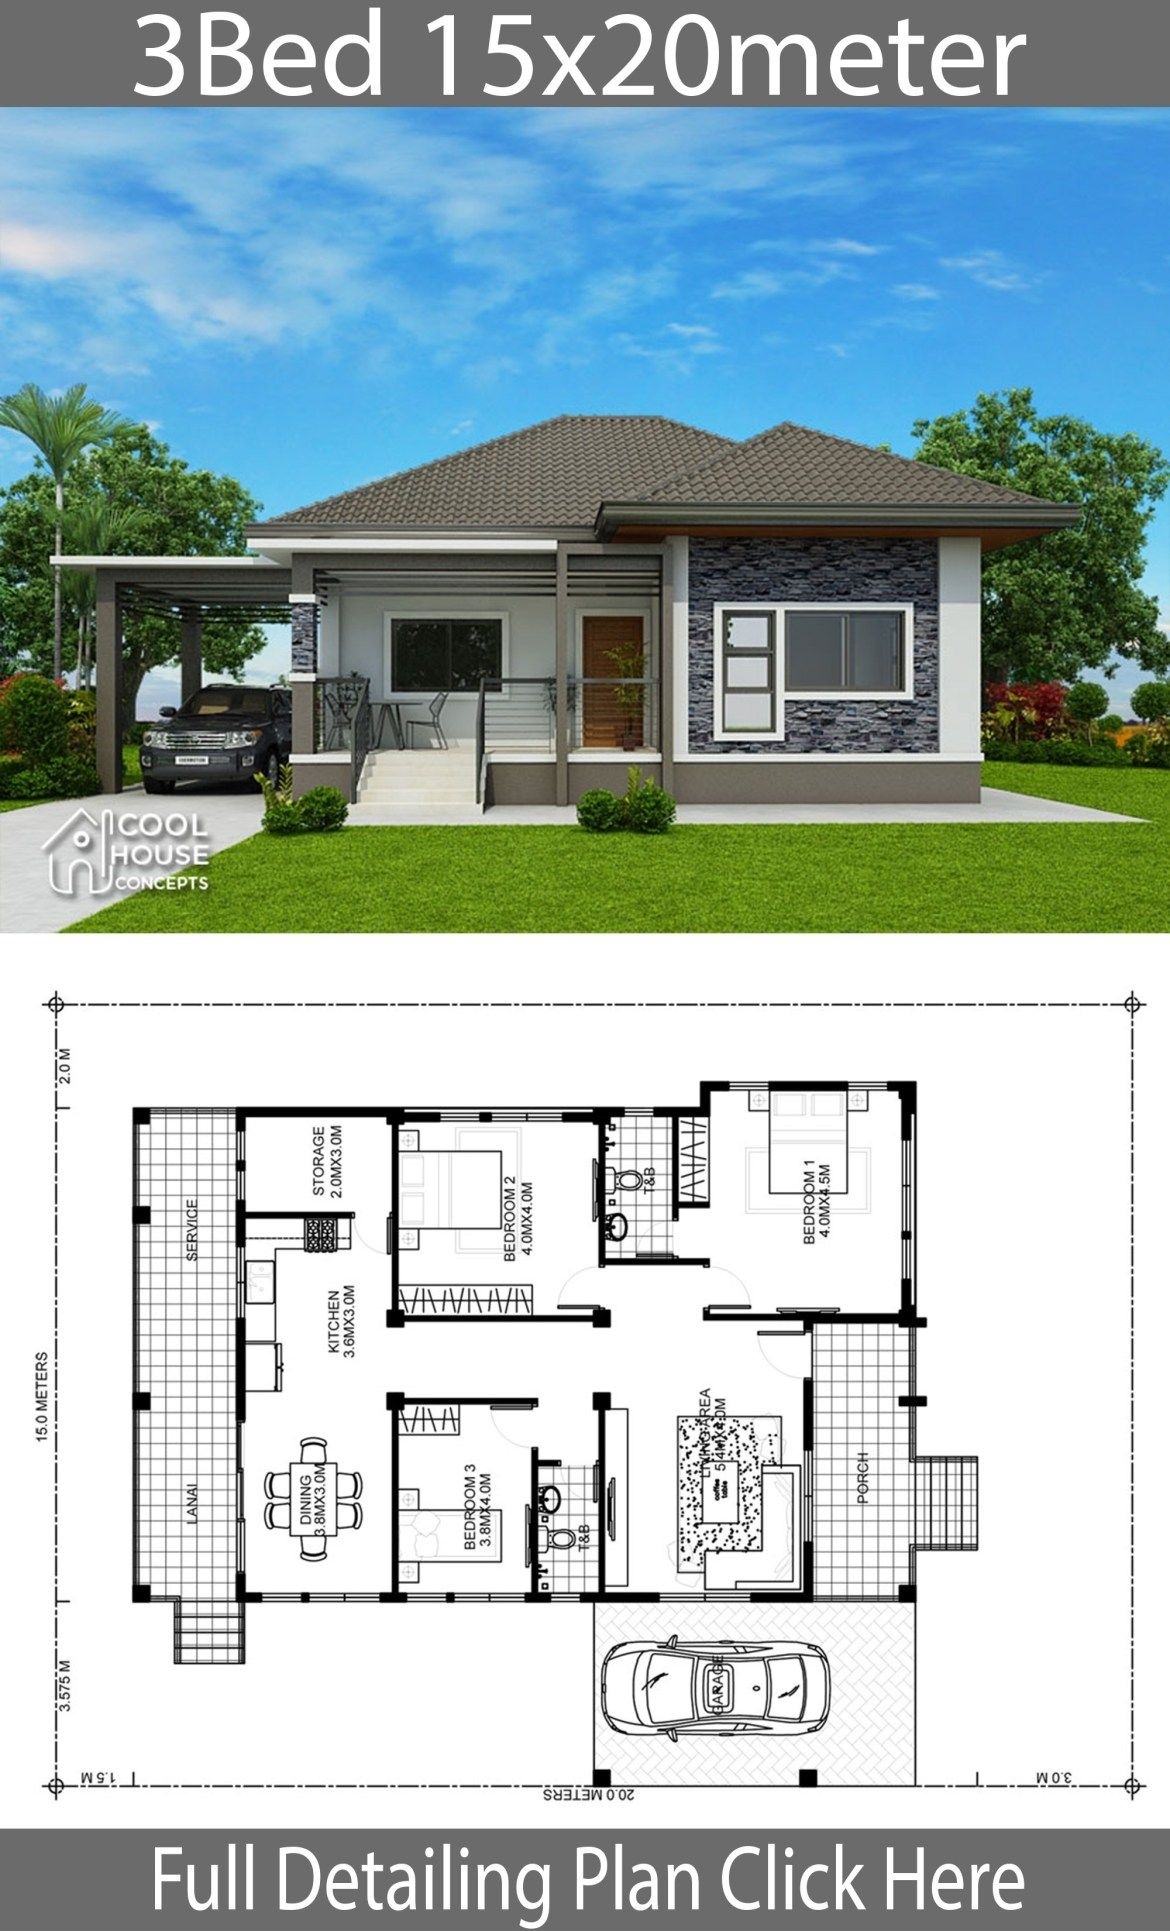 Incredible small 3 bedroom house plans philippines / small 2 storey house design with amazing 3 bedroom house plans in sa